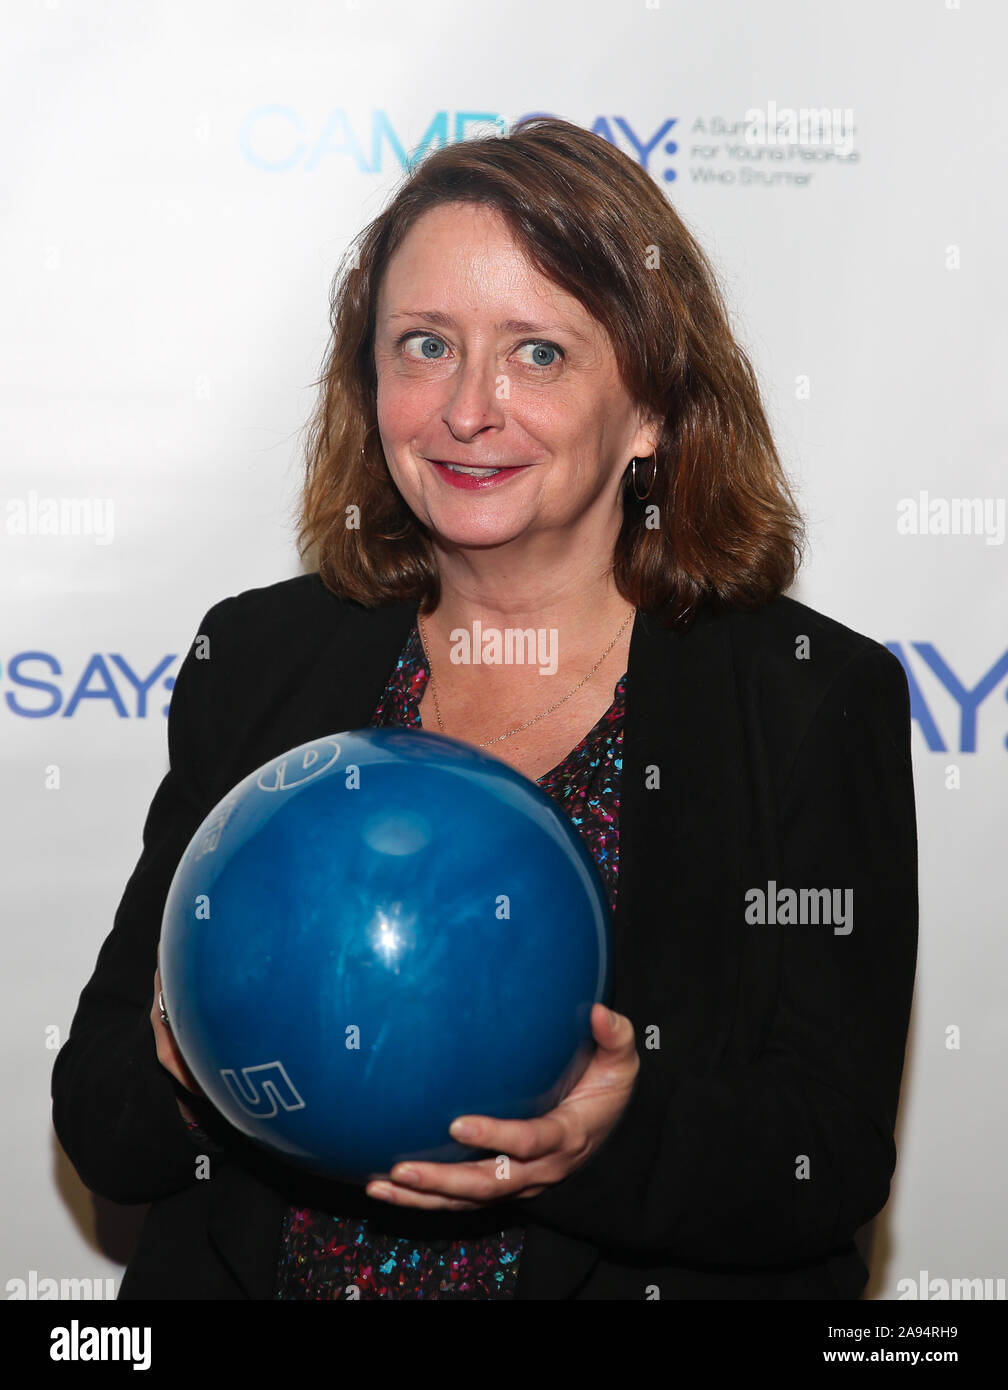 NEW YORK-NOV 11: Rachel Dratch attends the 8th Annual Paul Rudd All-Star Benefit for SAY at Lucky Strike Lanes on November 11, 2019 in New York City. Stock Photo